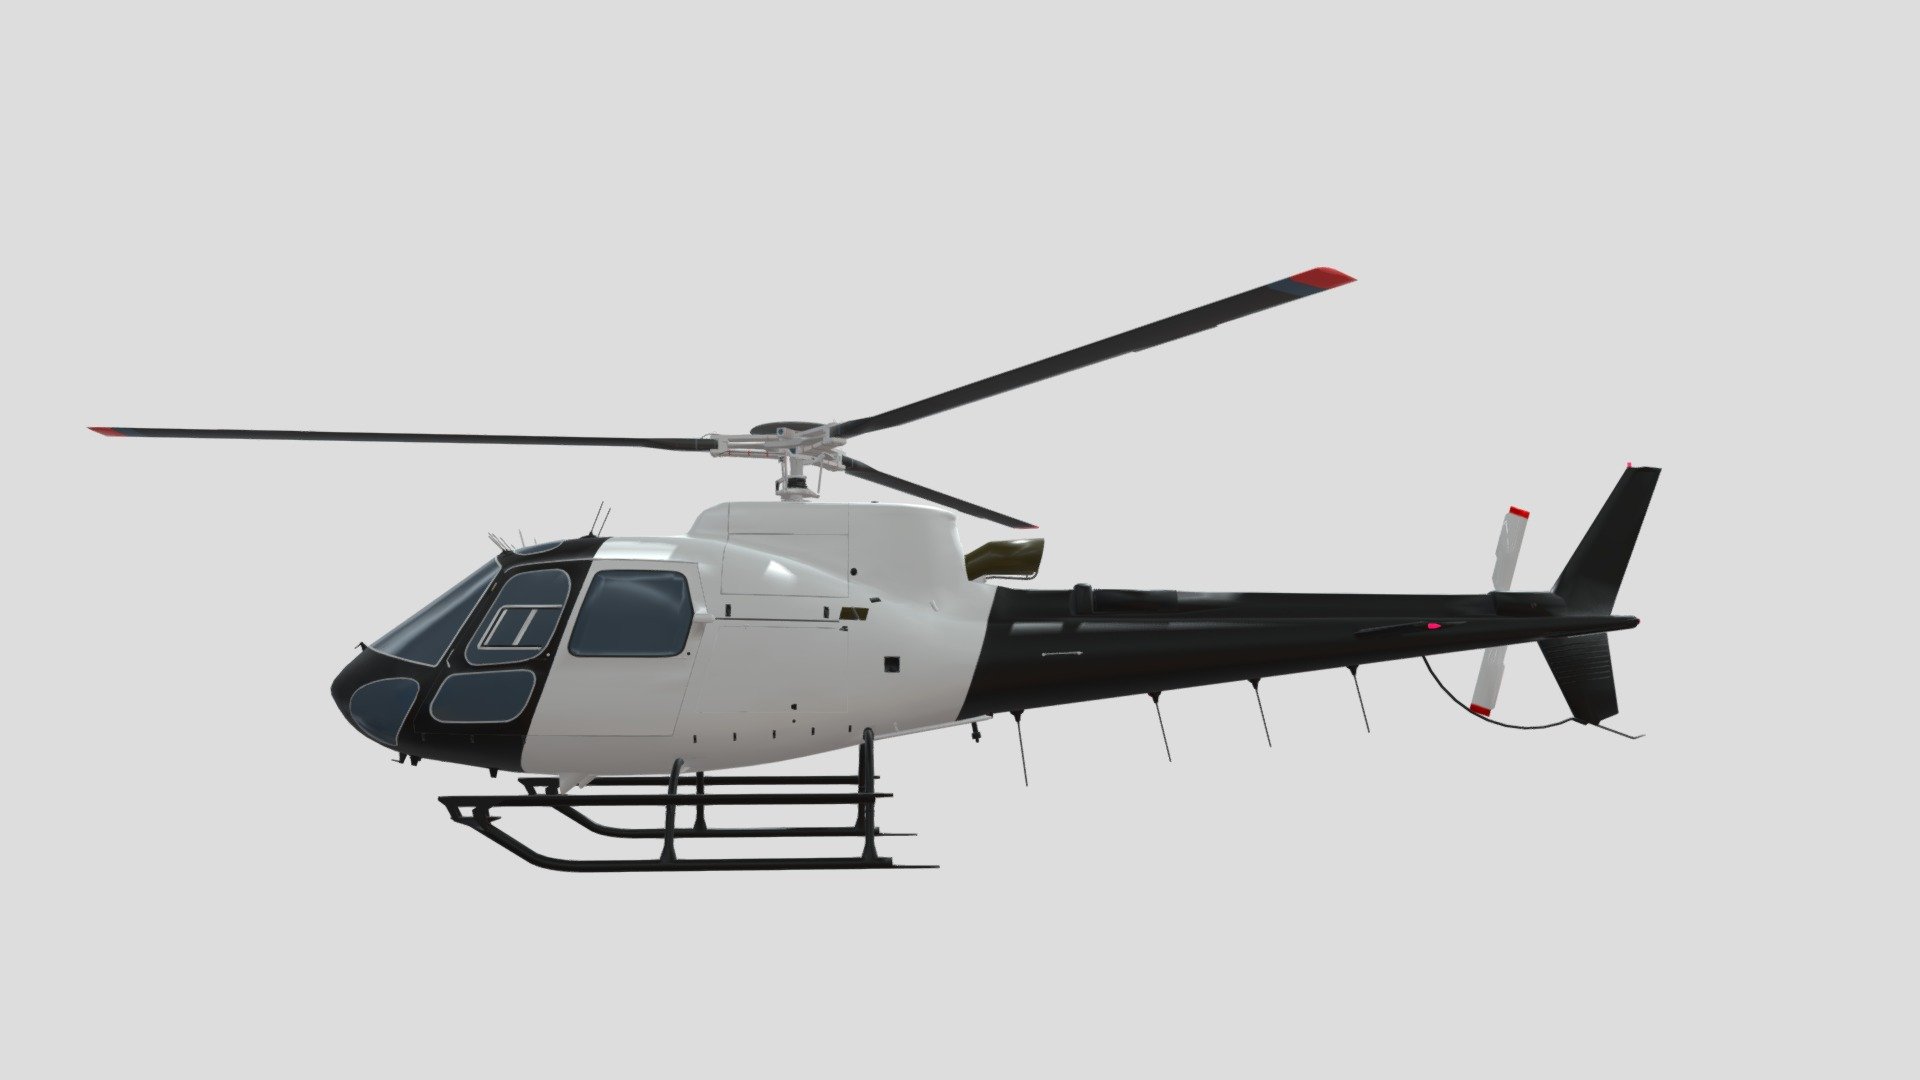 Helicopter model Eurocopter AS350

Modeled , textured and renderd in blender the model has 3 objects(Body,front and rear Propeller) each object has its uv and textures maps , made seperated for easily rigging and animating Textures : Body : 4k &amp;8k diffuse map , 4k meatllic rougness maps and emission map for the lights front propeller and back probeller , each has 1k difusse metallic roughness maps

Files: native Blender file with textures loaded and ready for rigging and rendering obj ,fbx ,dae files , for more formats , massge me . source file of the model with blnder materials and uv sets , in case you wnat to change textures colors or add different materials

Polygon Mesh: Helicopter_Body :- Verts:16967 , Edges:42710 , Faces:25912 , Triangles:29792 Front_propeller :- Verts:7497 , Edges:20438 , Faces:13044 , Triangles:13498 Helicopter_Body :- Verts:1309 , Edges:3624, Faces:2345 , Triangles:2345 - EurocopterAS350 - 3D model by EveryThing-Store 3d model